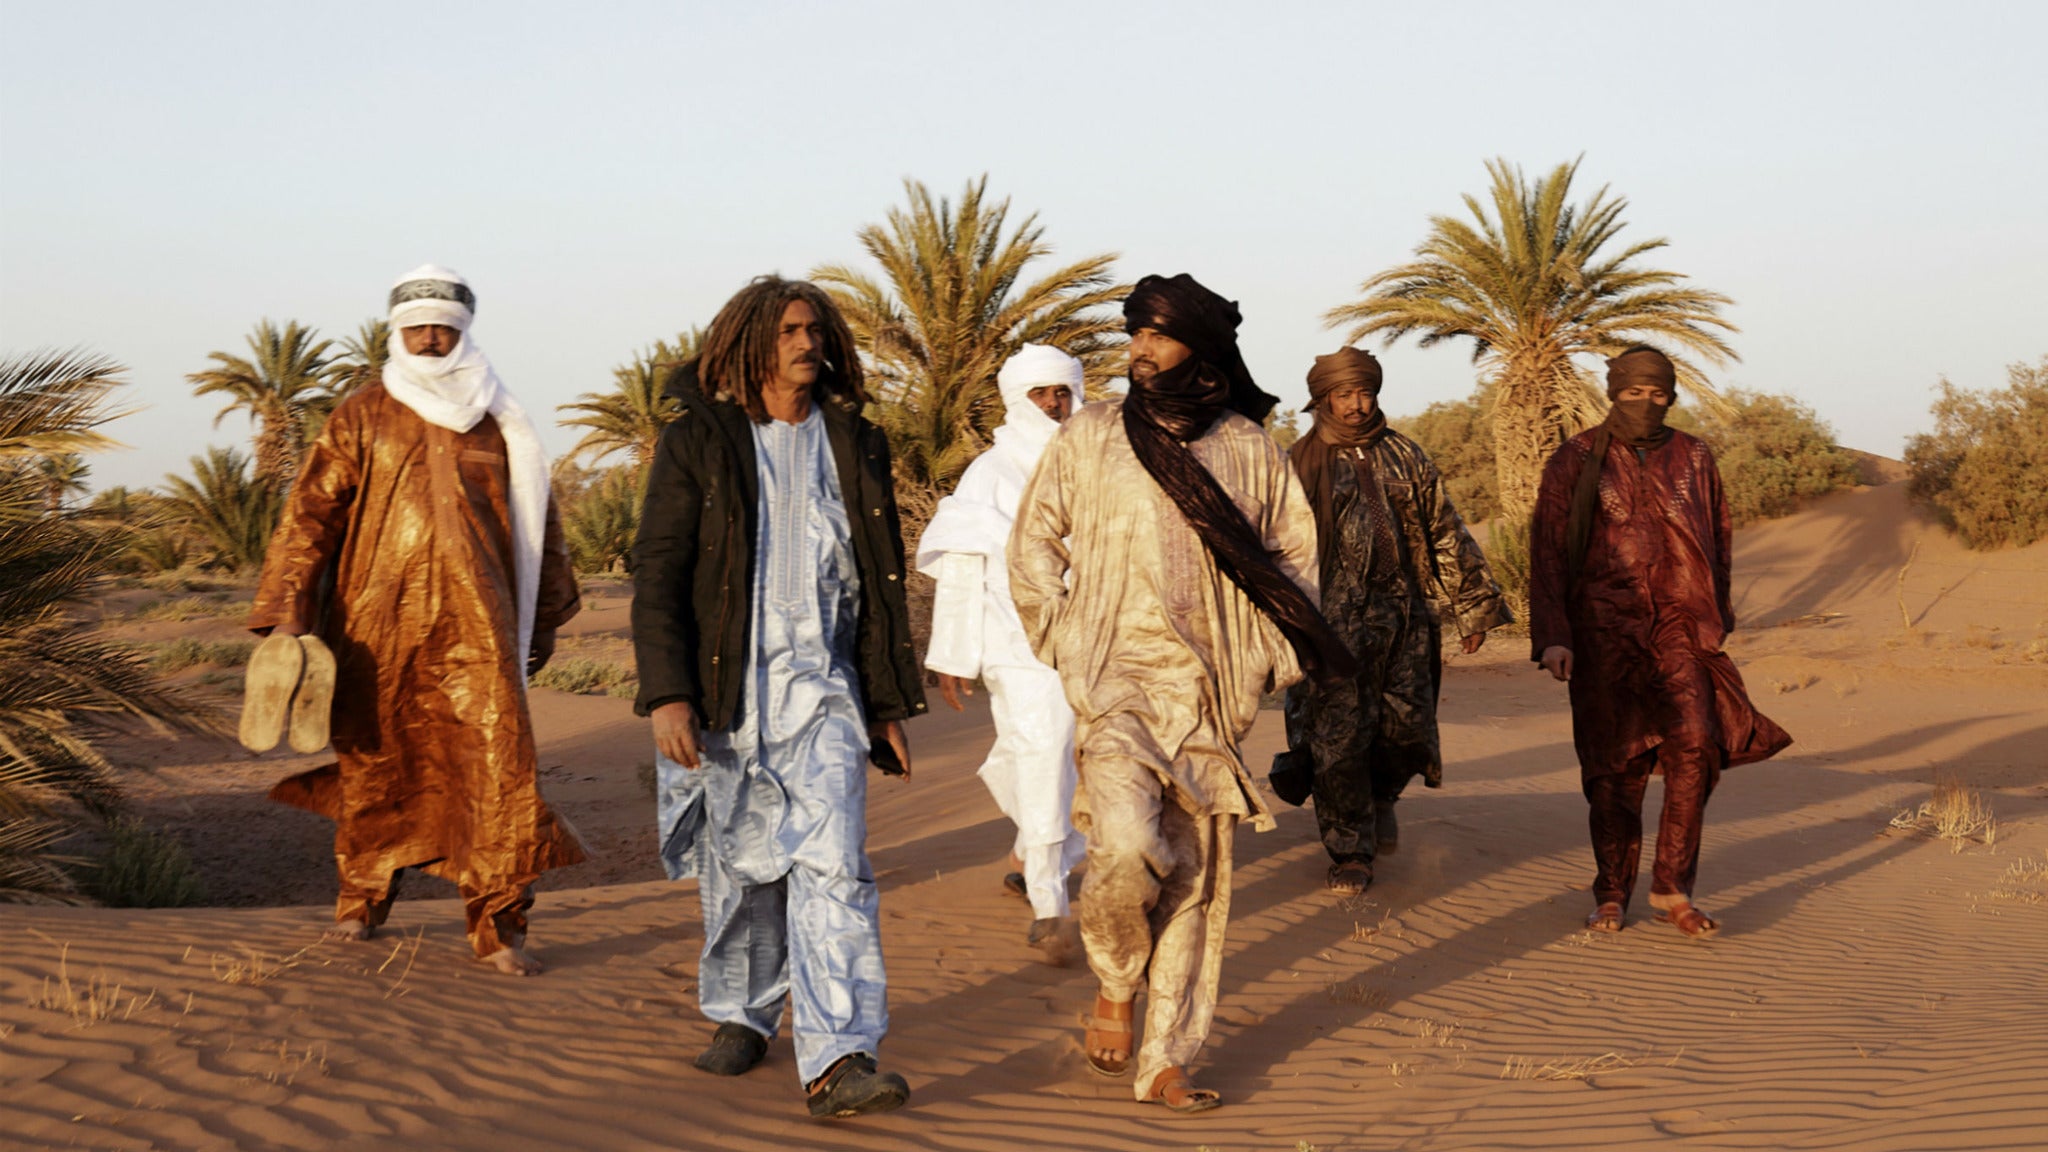 Image used with permission from Ticketmaster | Tinariwen tickets